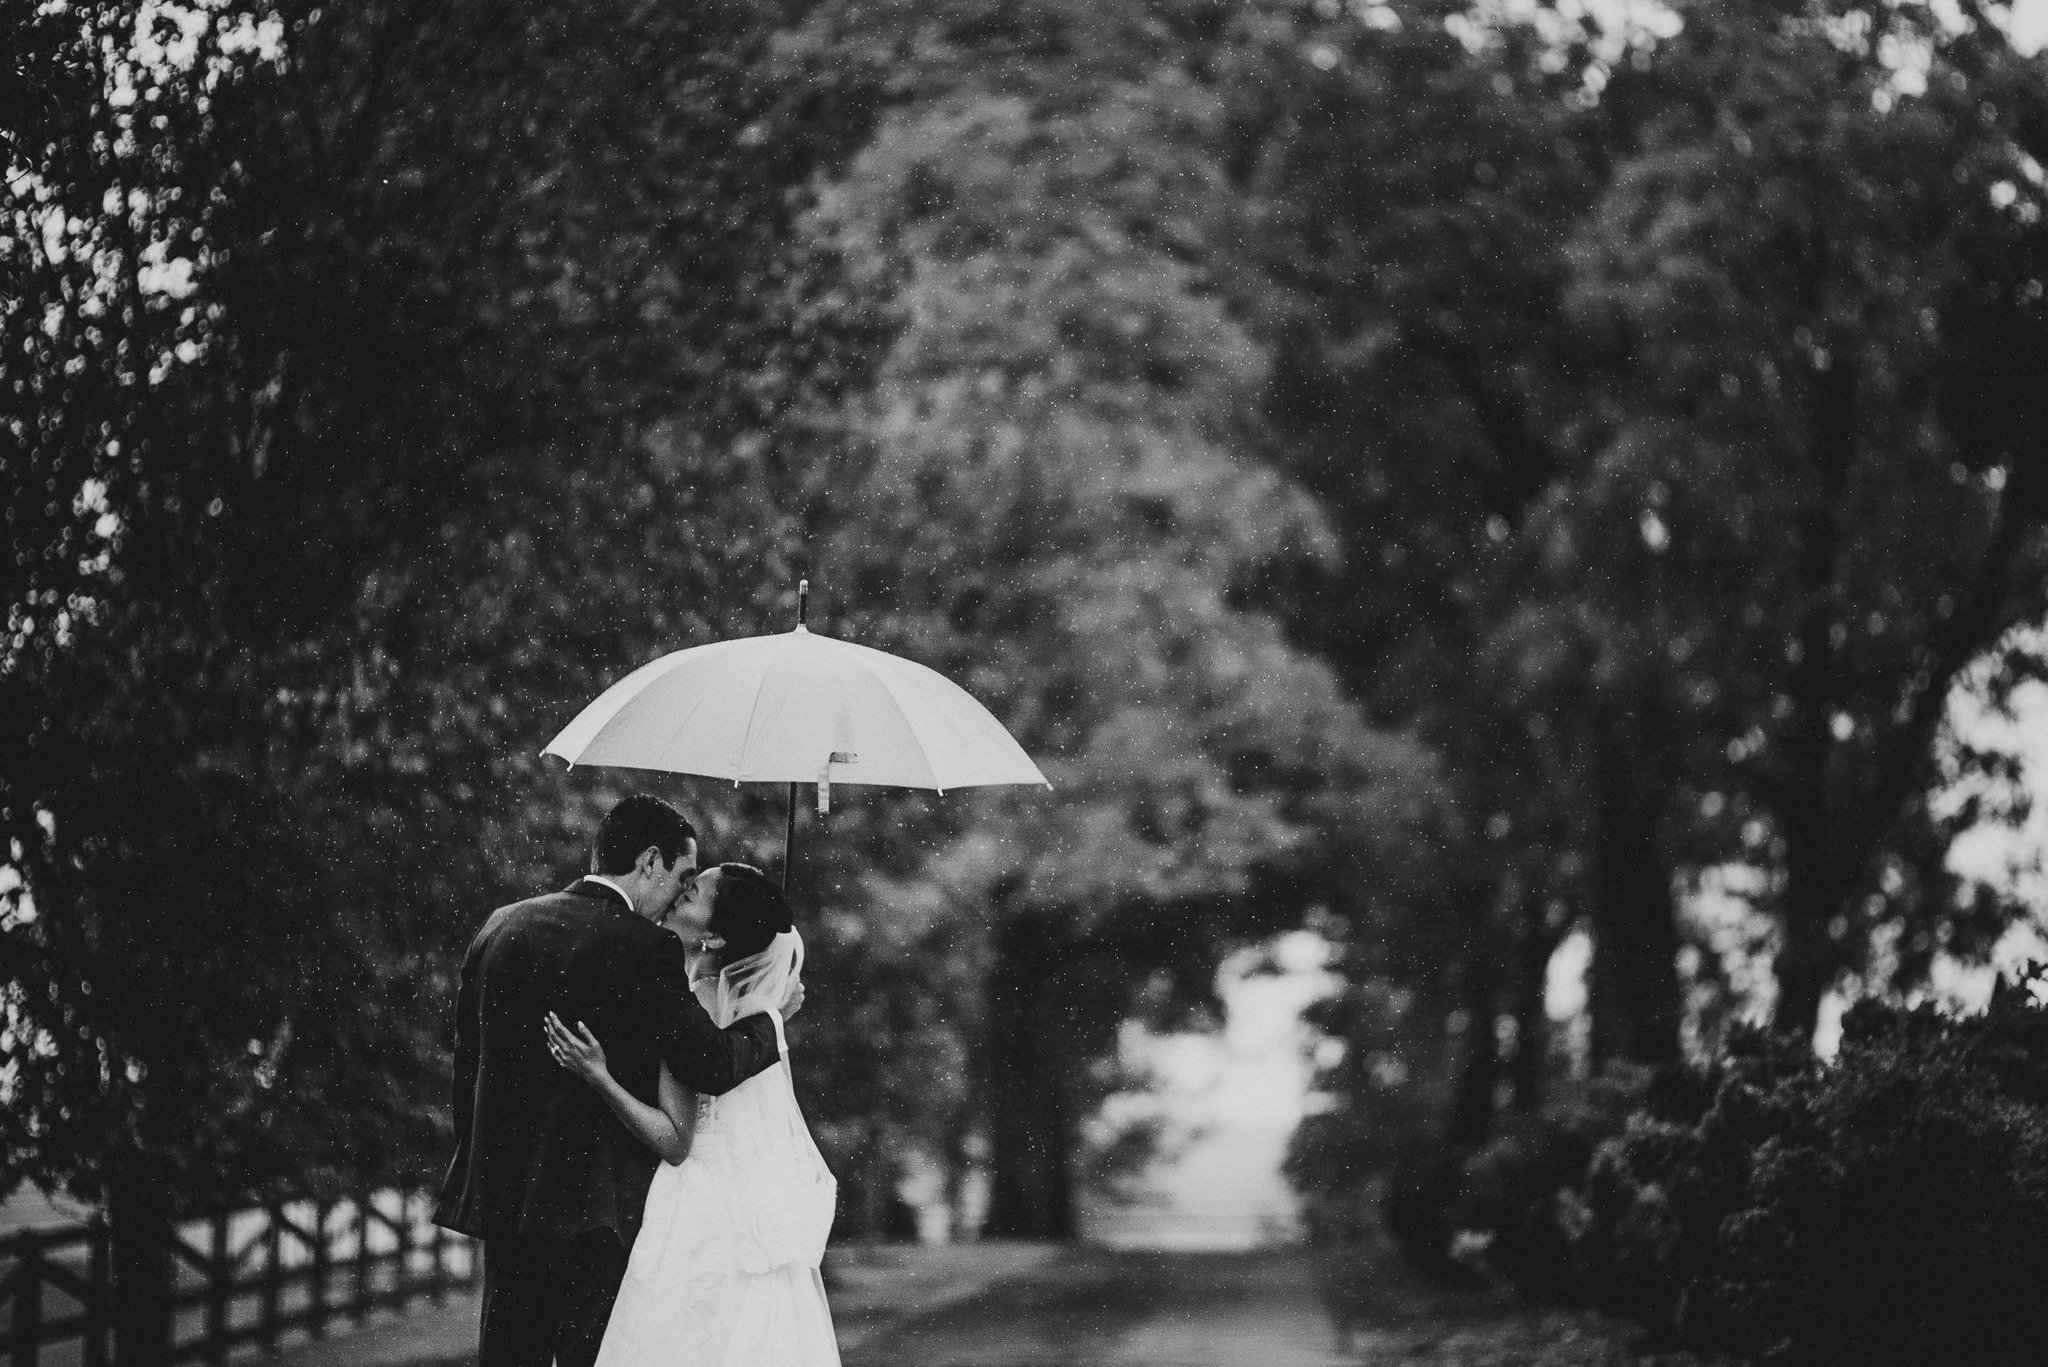 This magical moment between the newlyweds stopped me in my tracks. The rain may have been falling, but their love shone brighter. The black-and-white tones capture the raw emotion of their kiss, a timeless symbol of their forever.

Congratulations to